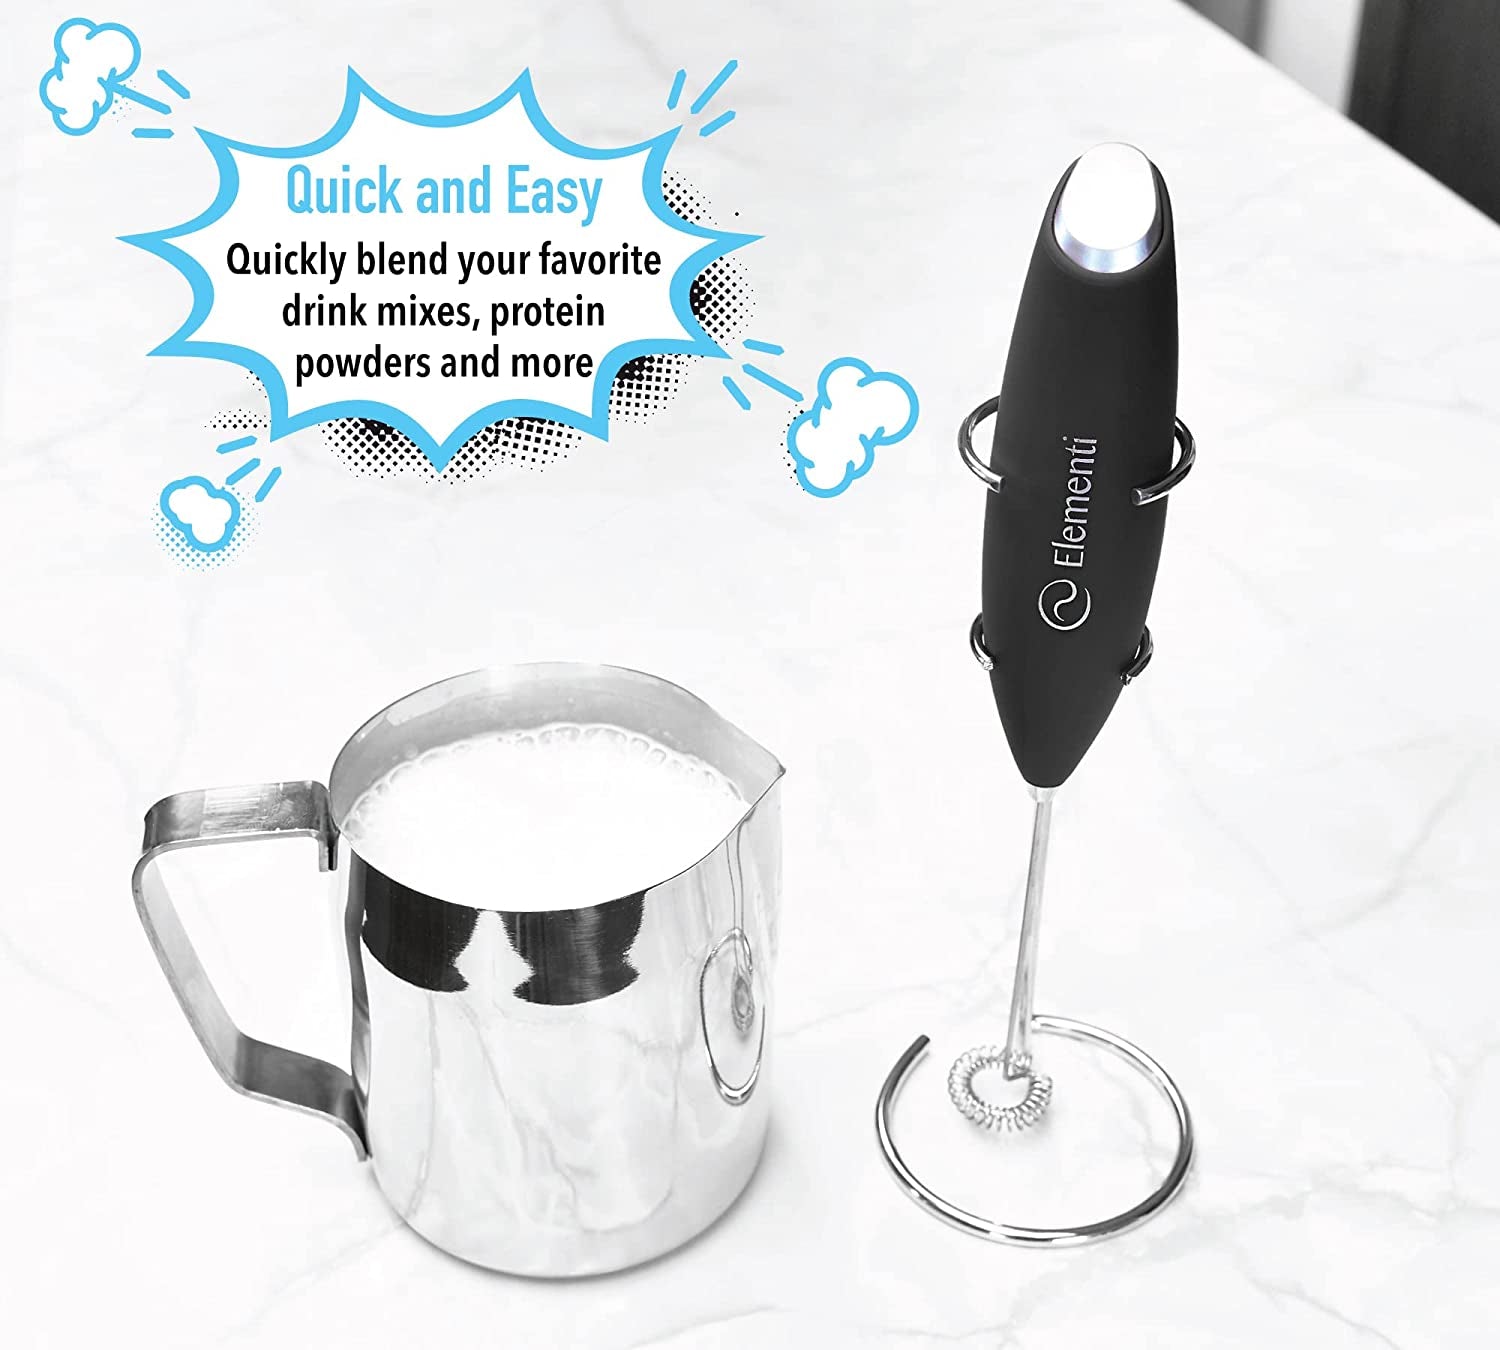 Professional Product Title: " Milk Frother Wand & Matcha Mixer - Mini Electric Whisk for Coffee and Milk Frothing - Handheld Frother for Coffee and Matcha - Electric Stirrers for Perfectly Blended Beverages (Black)"